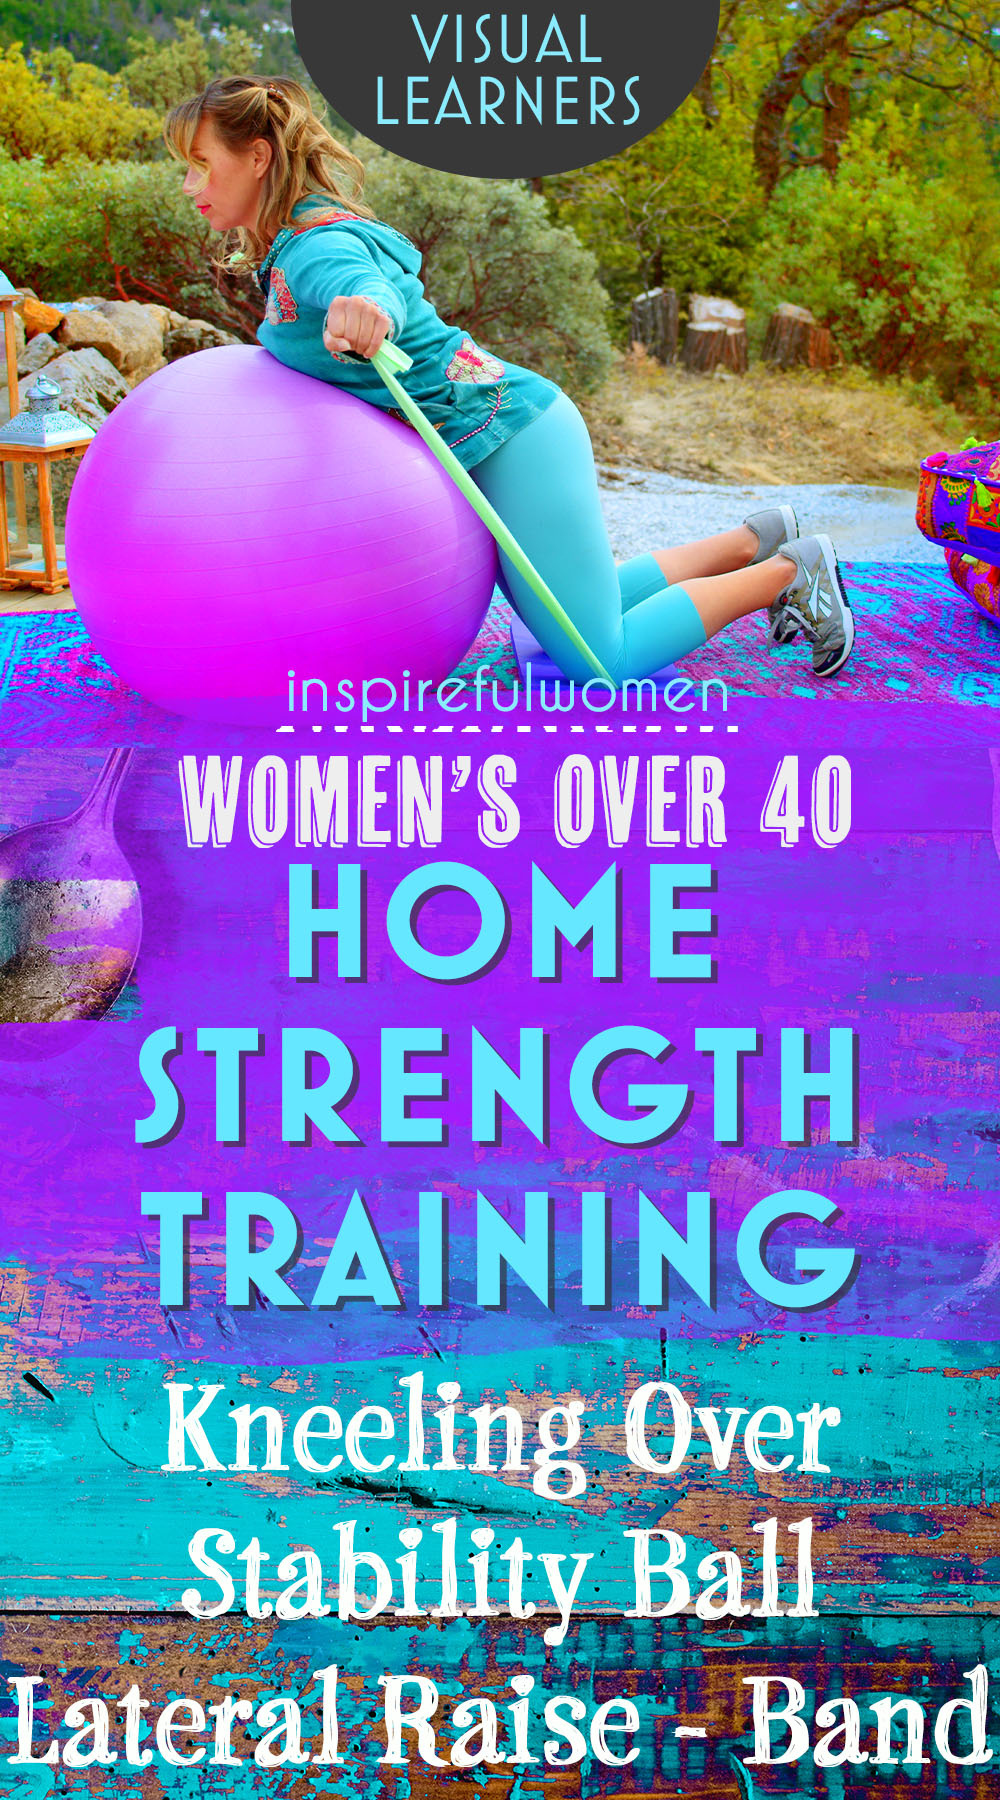 bent-over-lateral-raise-resistance-band-stability-ball-deltoid-workout-at-home-women-over-40